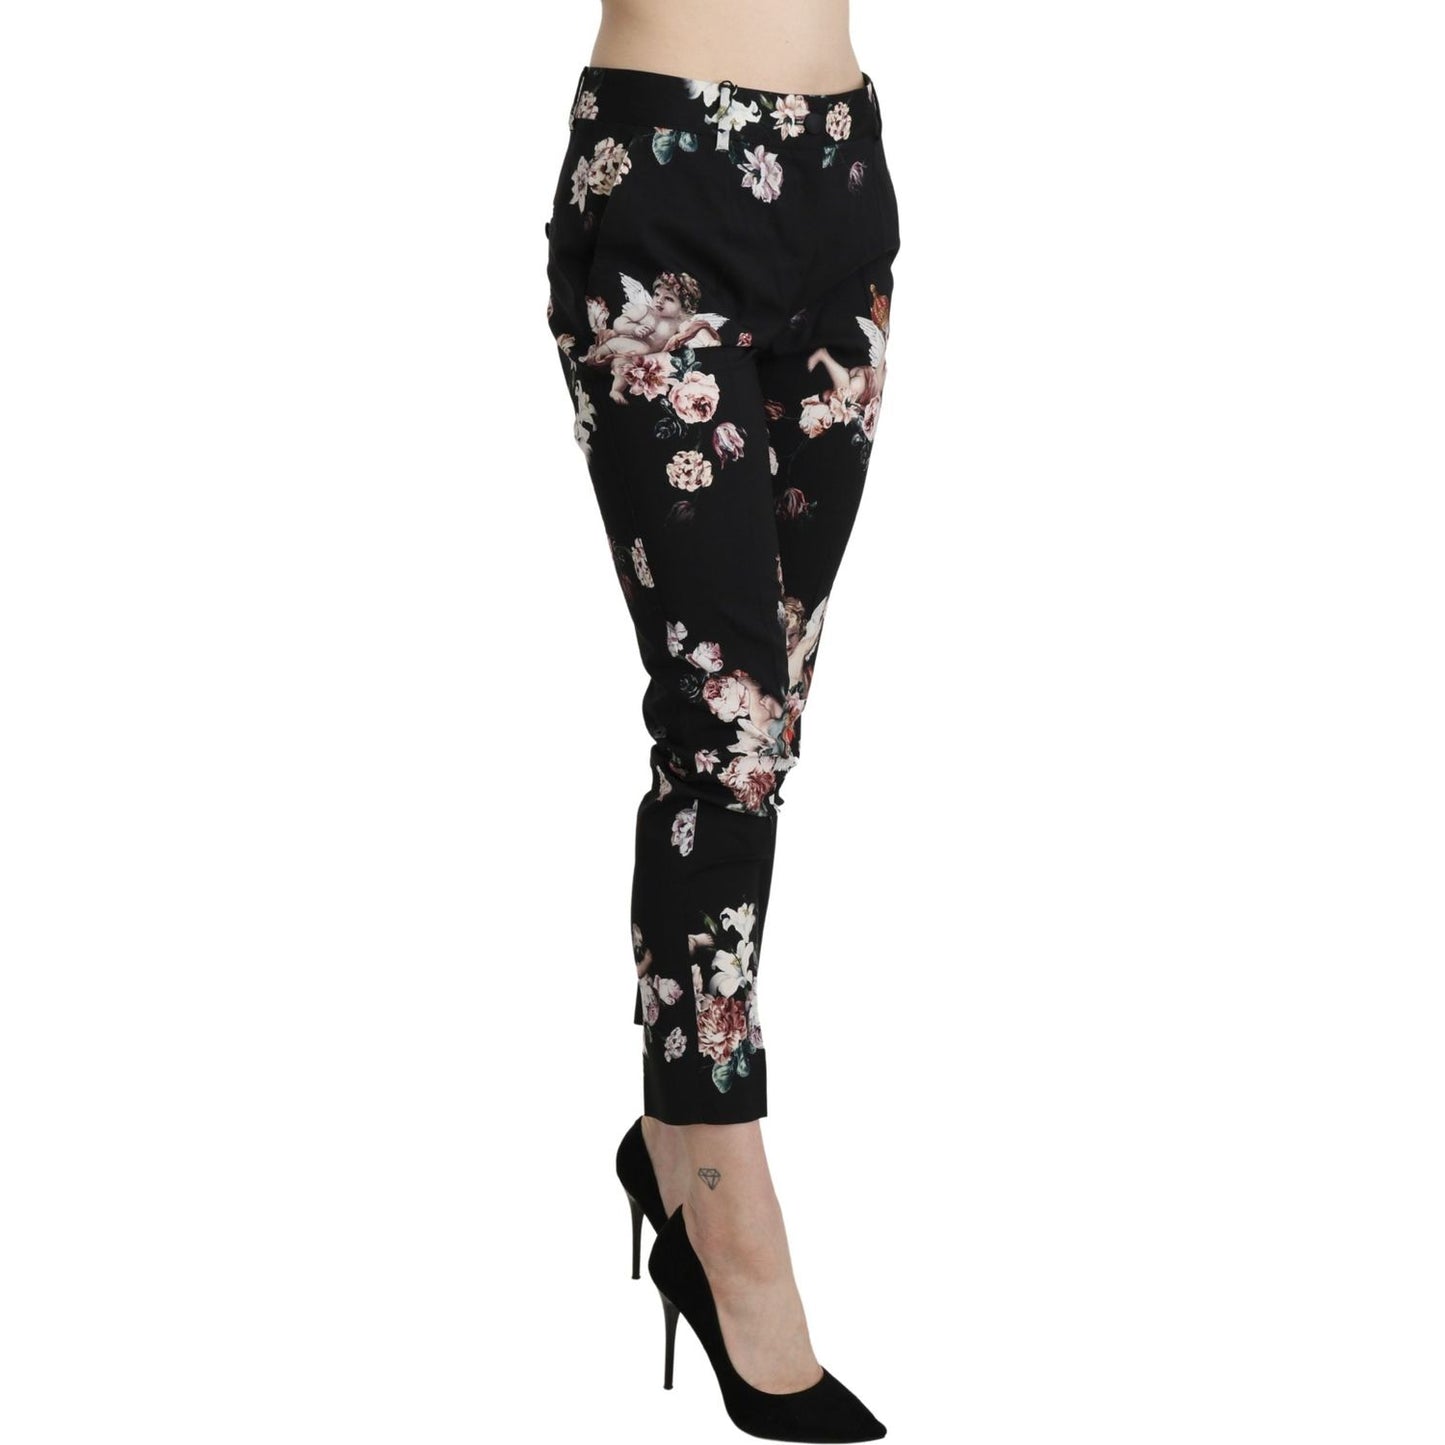 Dolce & Gabbana Elegant High Waist Cropped Trousers Jeans & Pants black-angel-floral-cropped-trouser-wool-pants IMG_0964-scaled-40a05506-73b.jpg